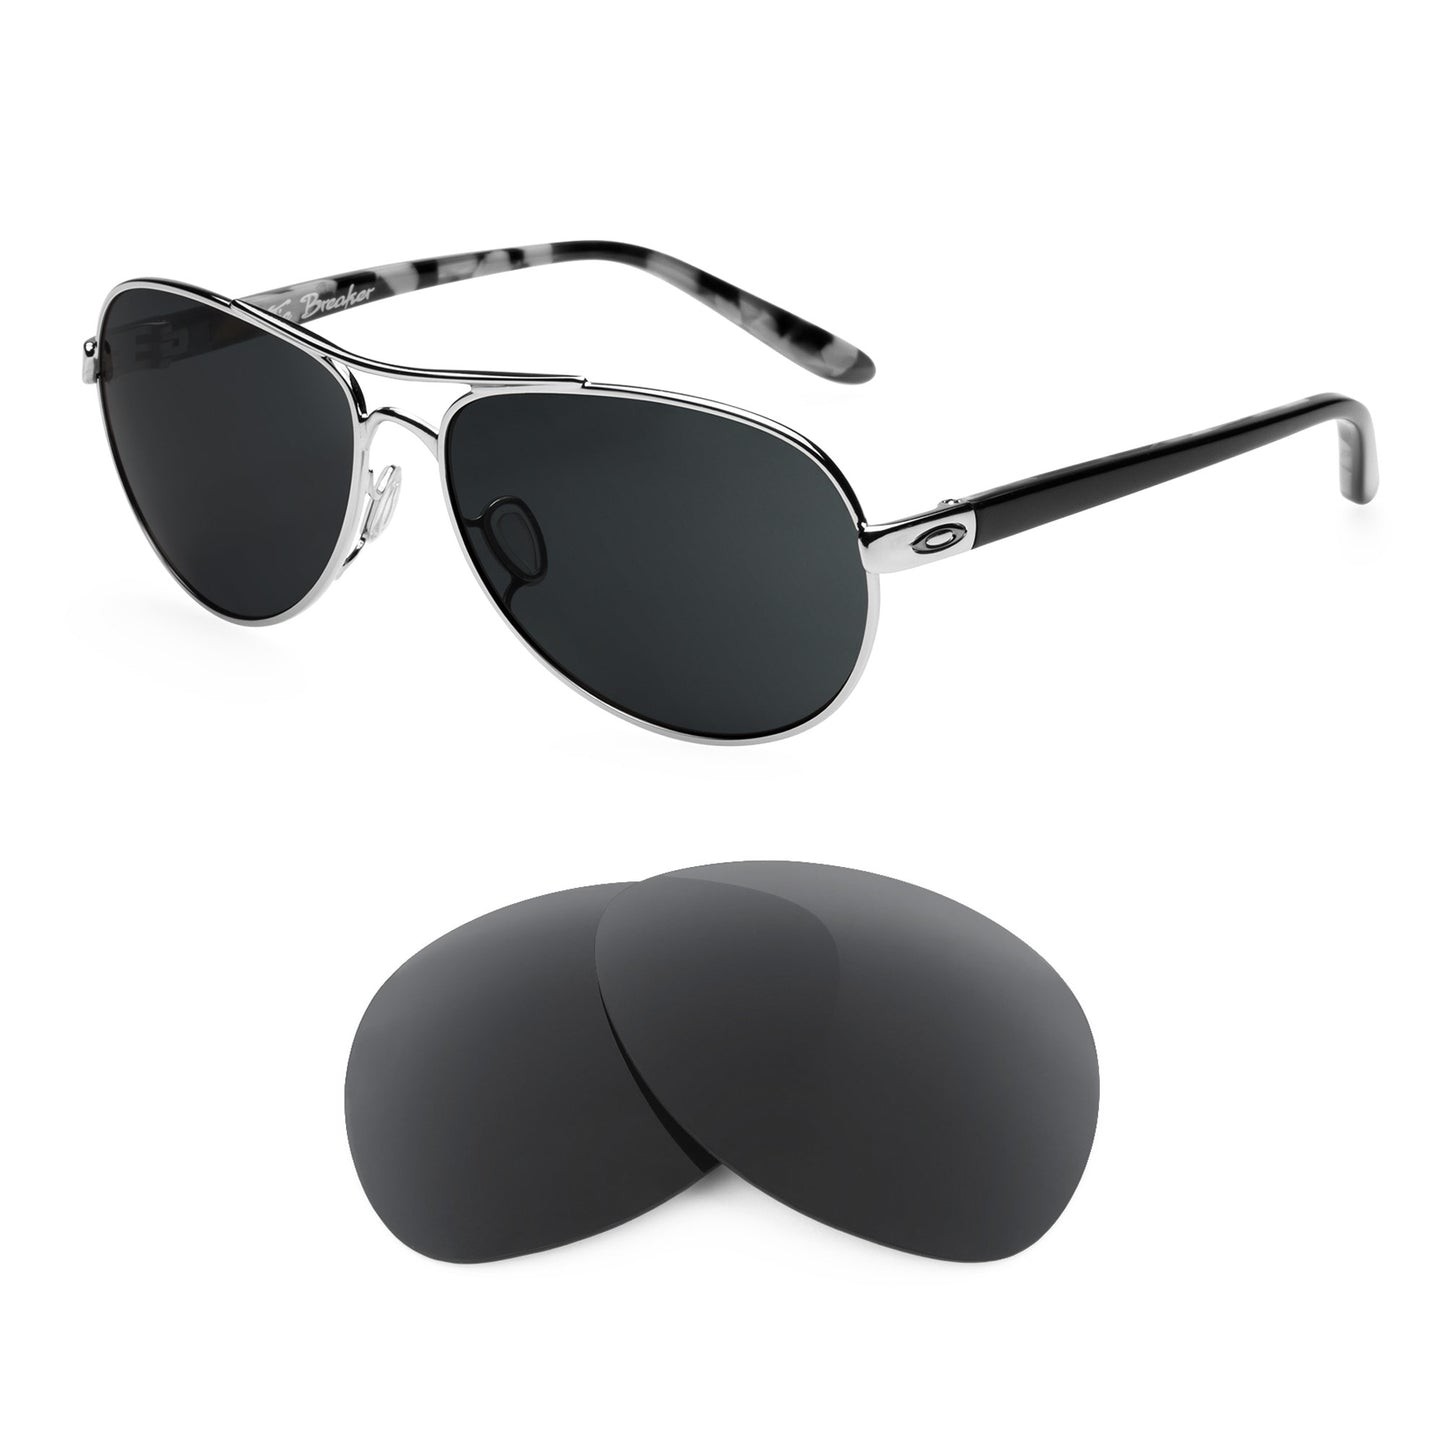 Oakley Tie Breaker sunglasses with replacement lenses